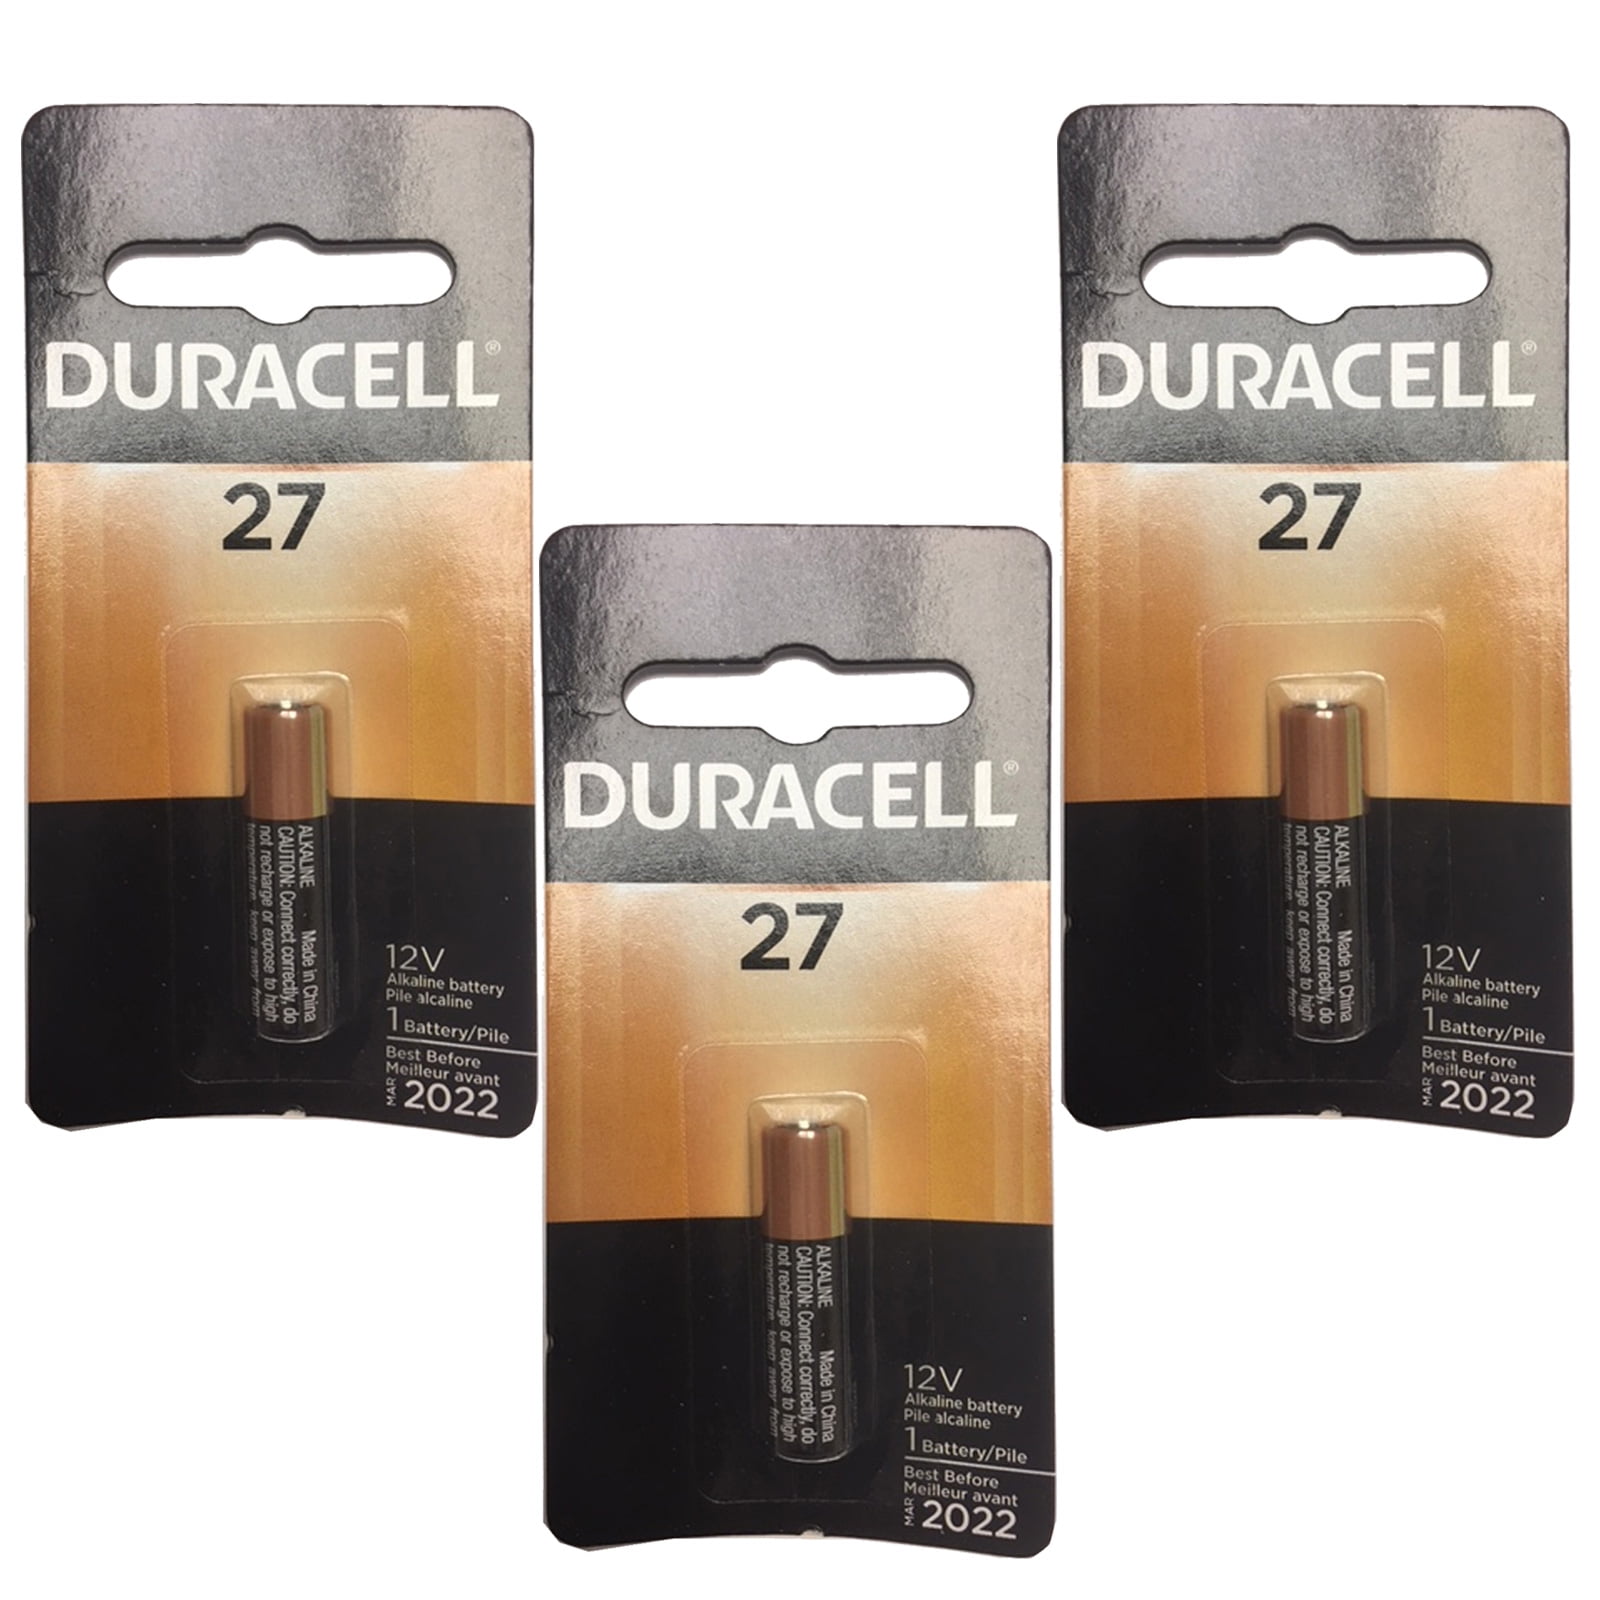 3x Duracell MN27 Alkaline 12V Battery Garage Openers Keyless Remotes Fobs